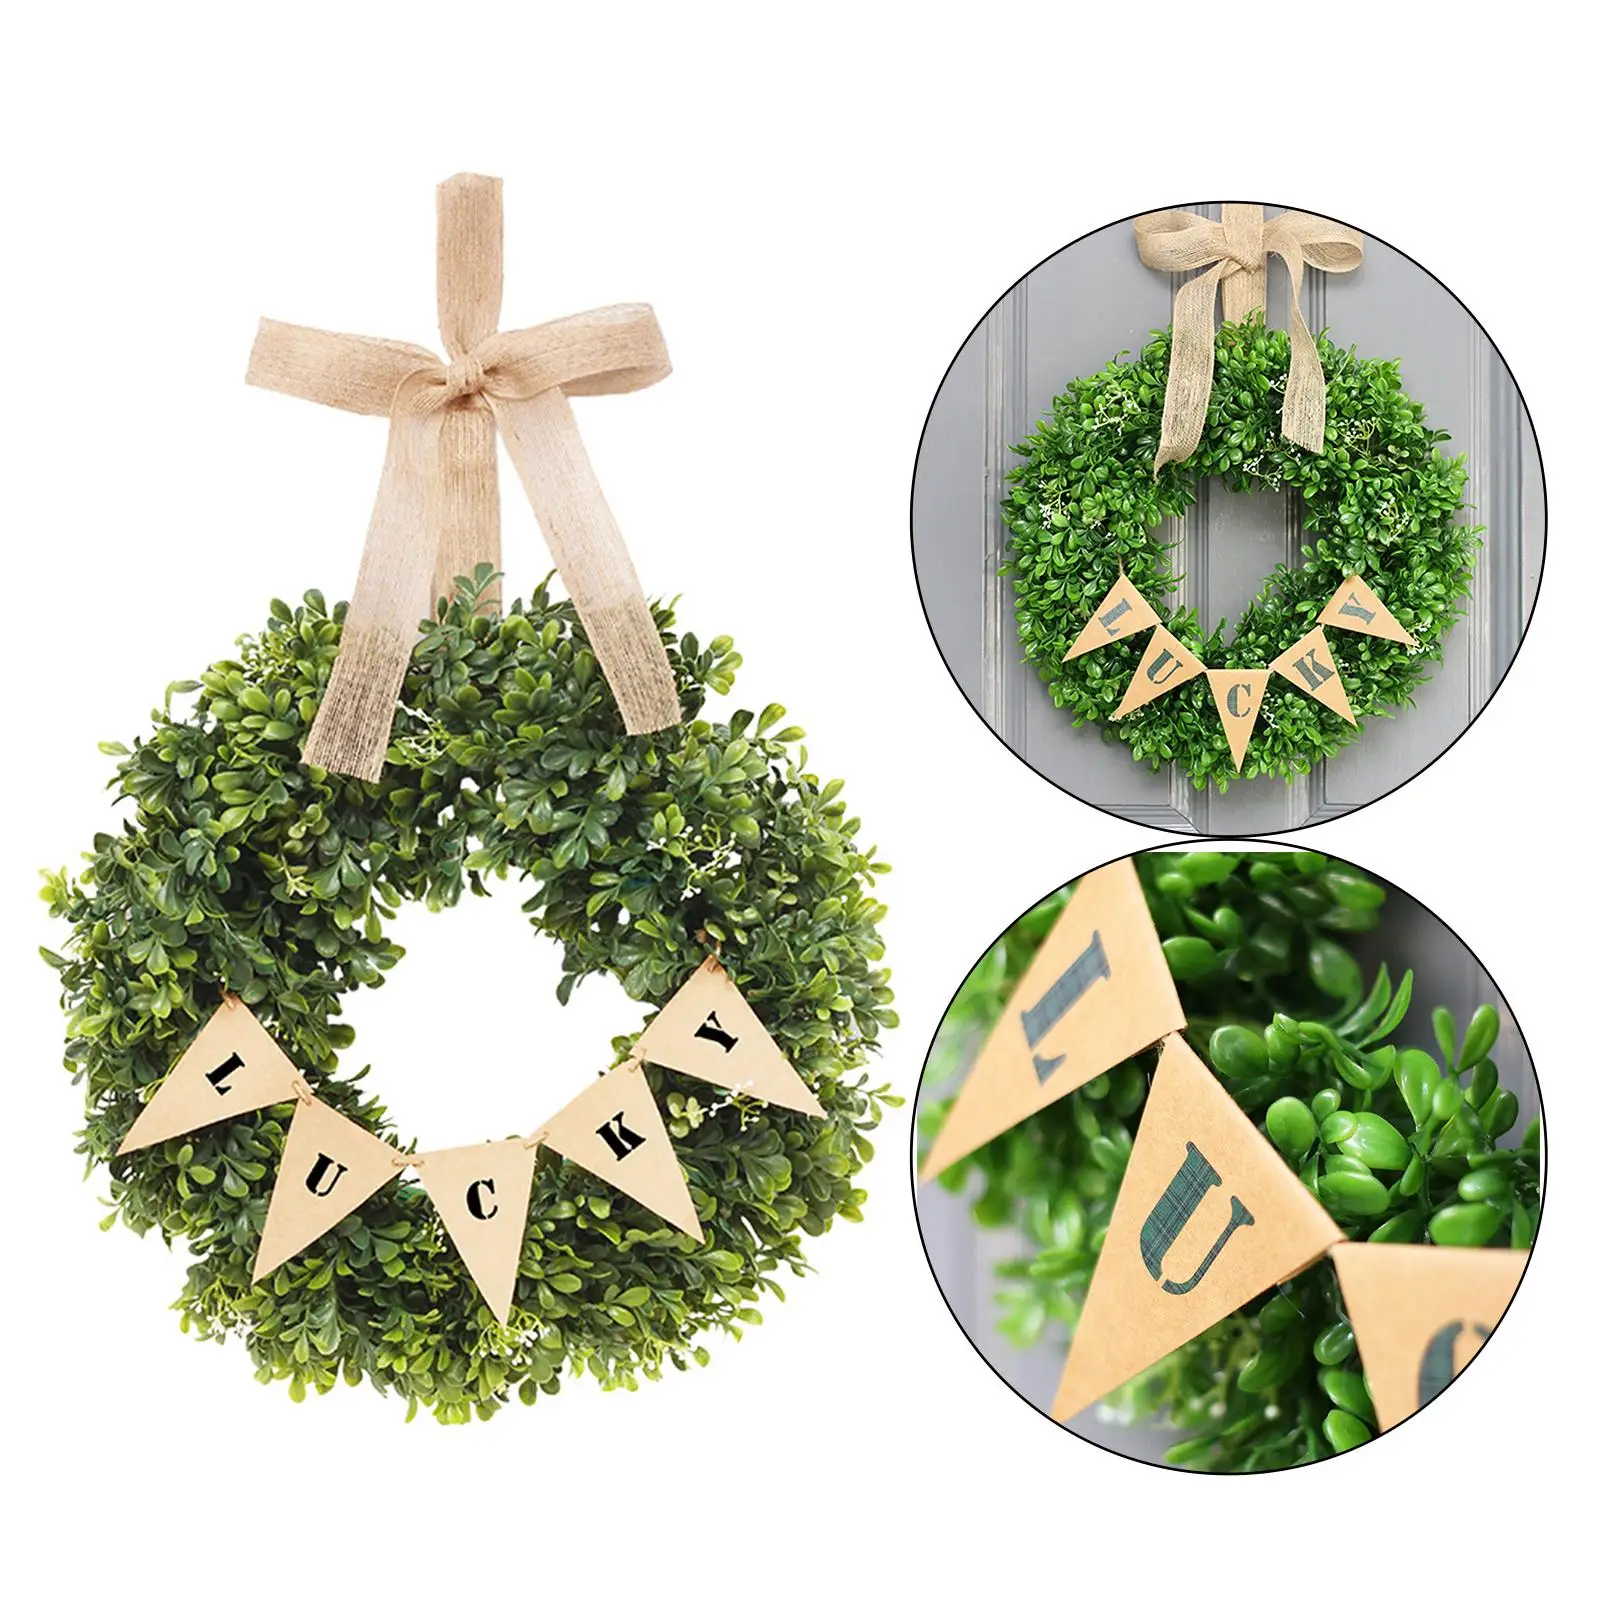 40cm Easter Greenery Wreath Spring Wreaths Window Party Decor ,Durable Materials Suit for All Scenarios Widely Usages Home D￩cor